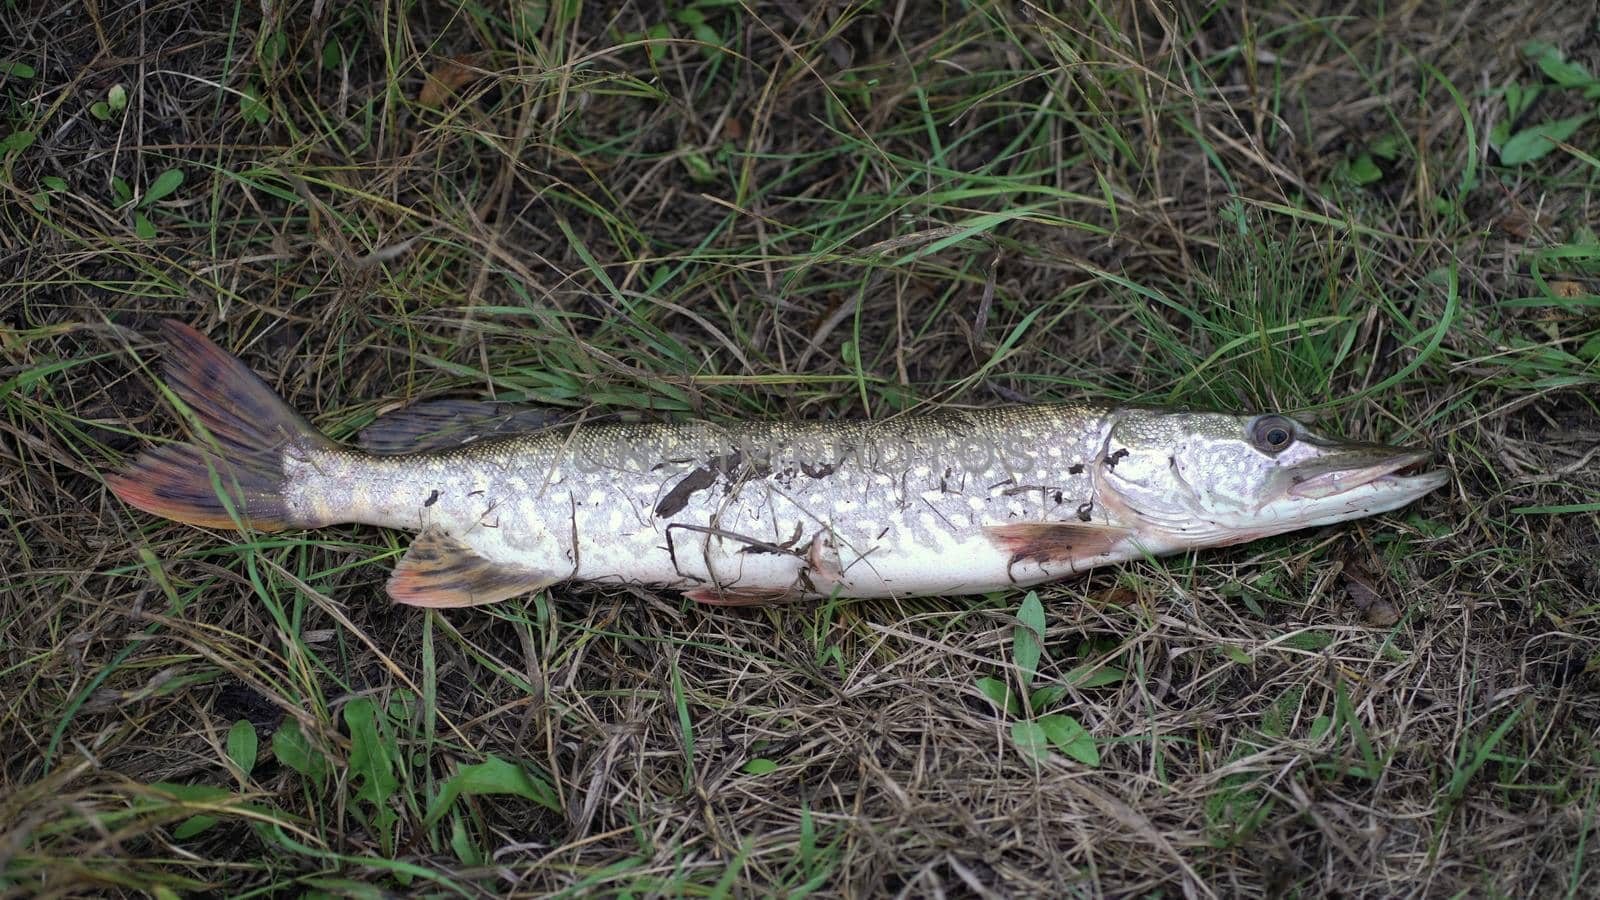 Live pike caught by the fisherman lies on the grass.